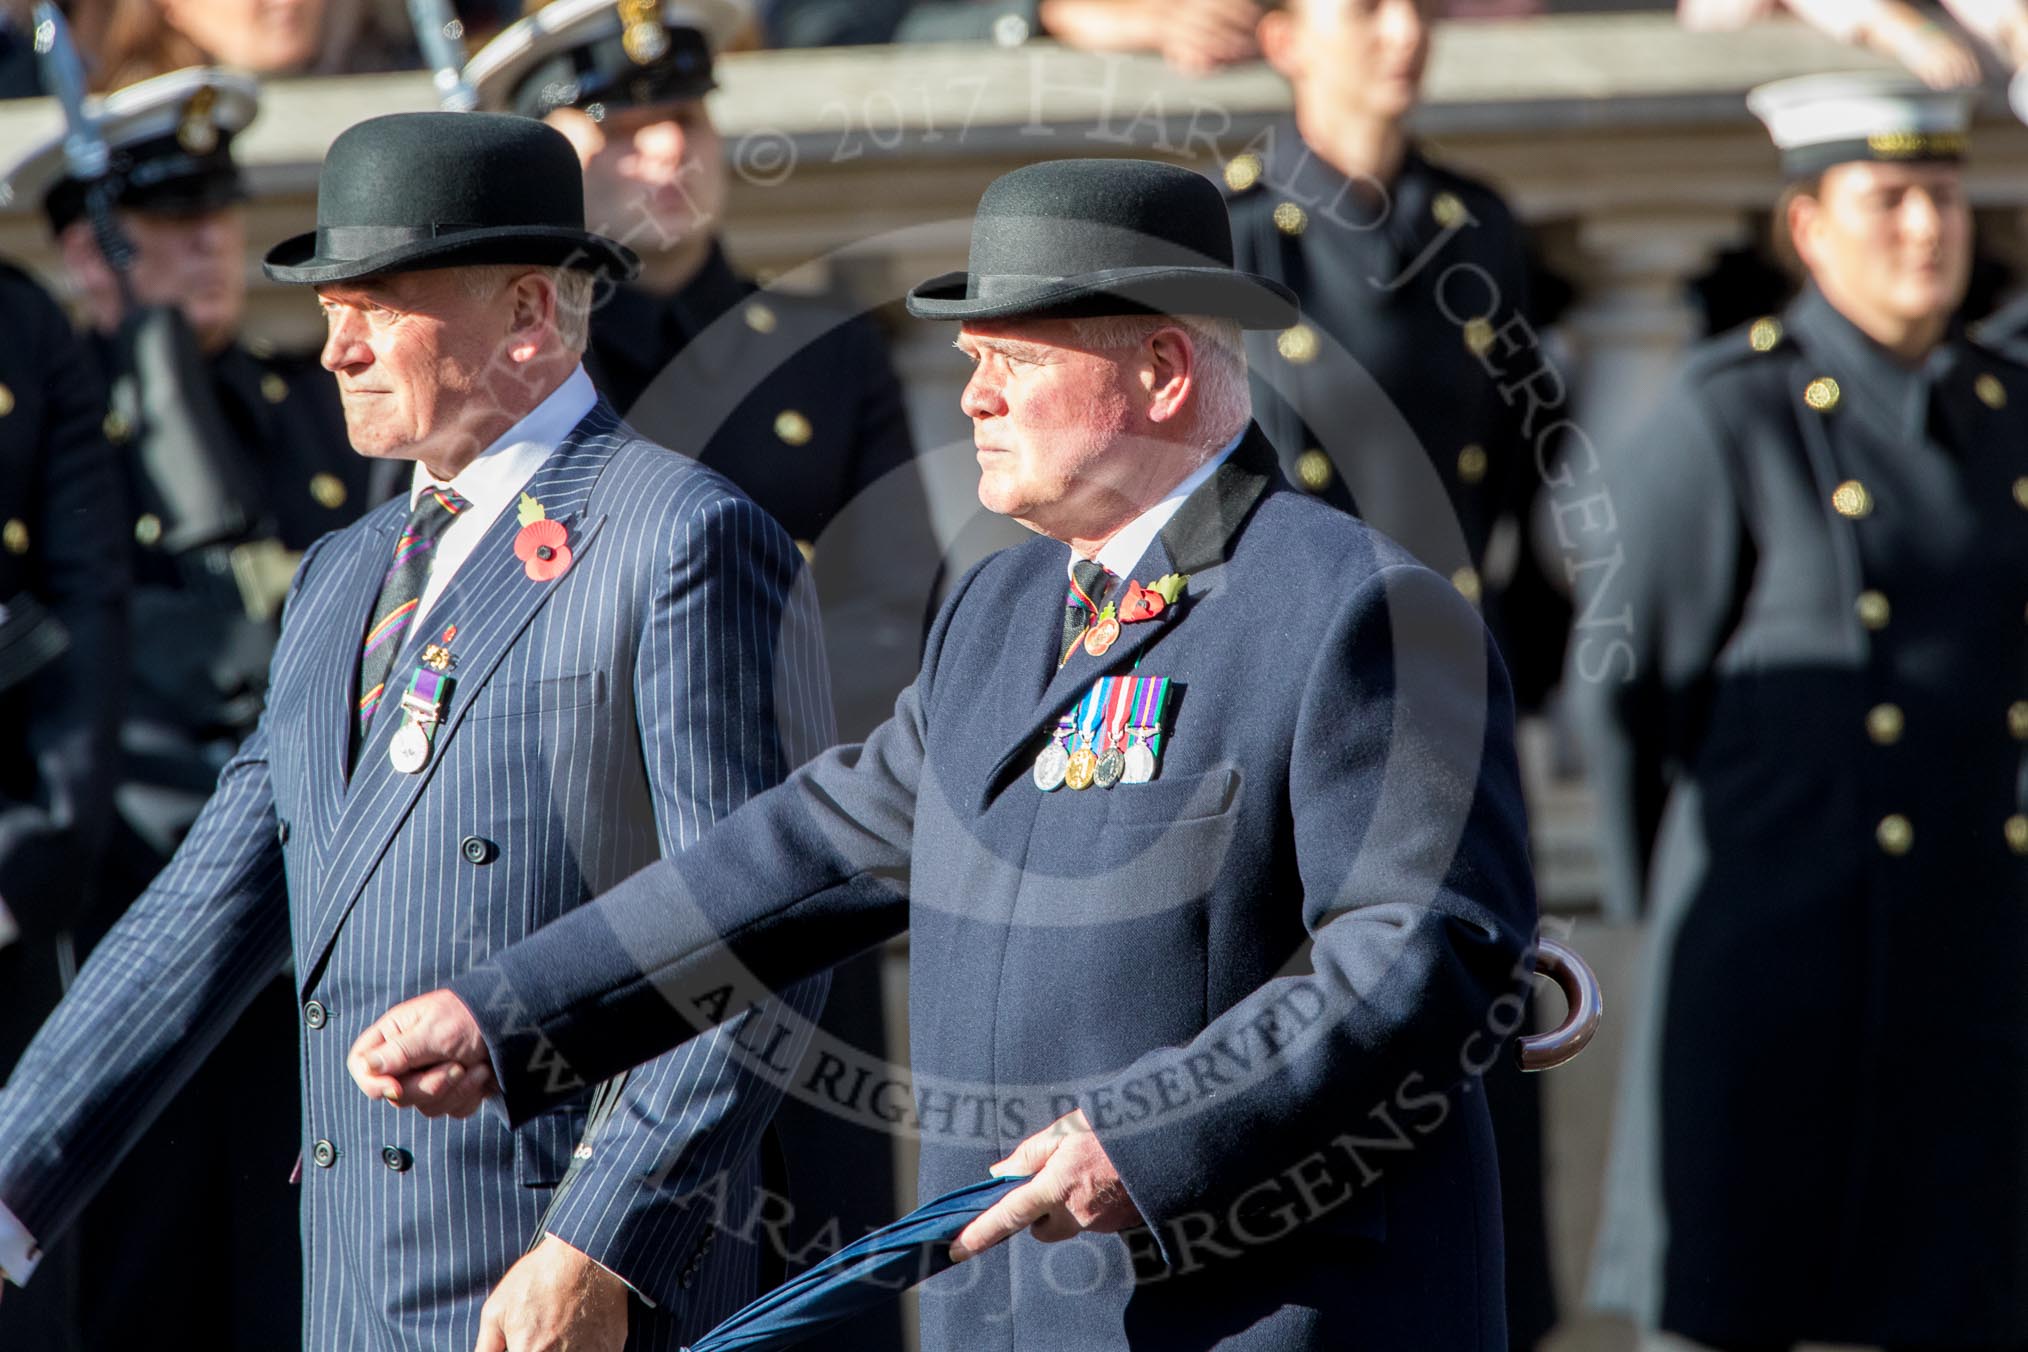 The Royal Hampshire Regimental Association (Group A27, 51 members) during the Royal British Legion March Past on Remembrance Sunday at the Cenotaph, Whitehall, Westminster, London, 11 November 2018, 12:01.